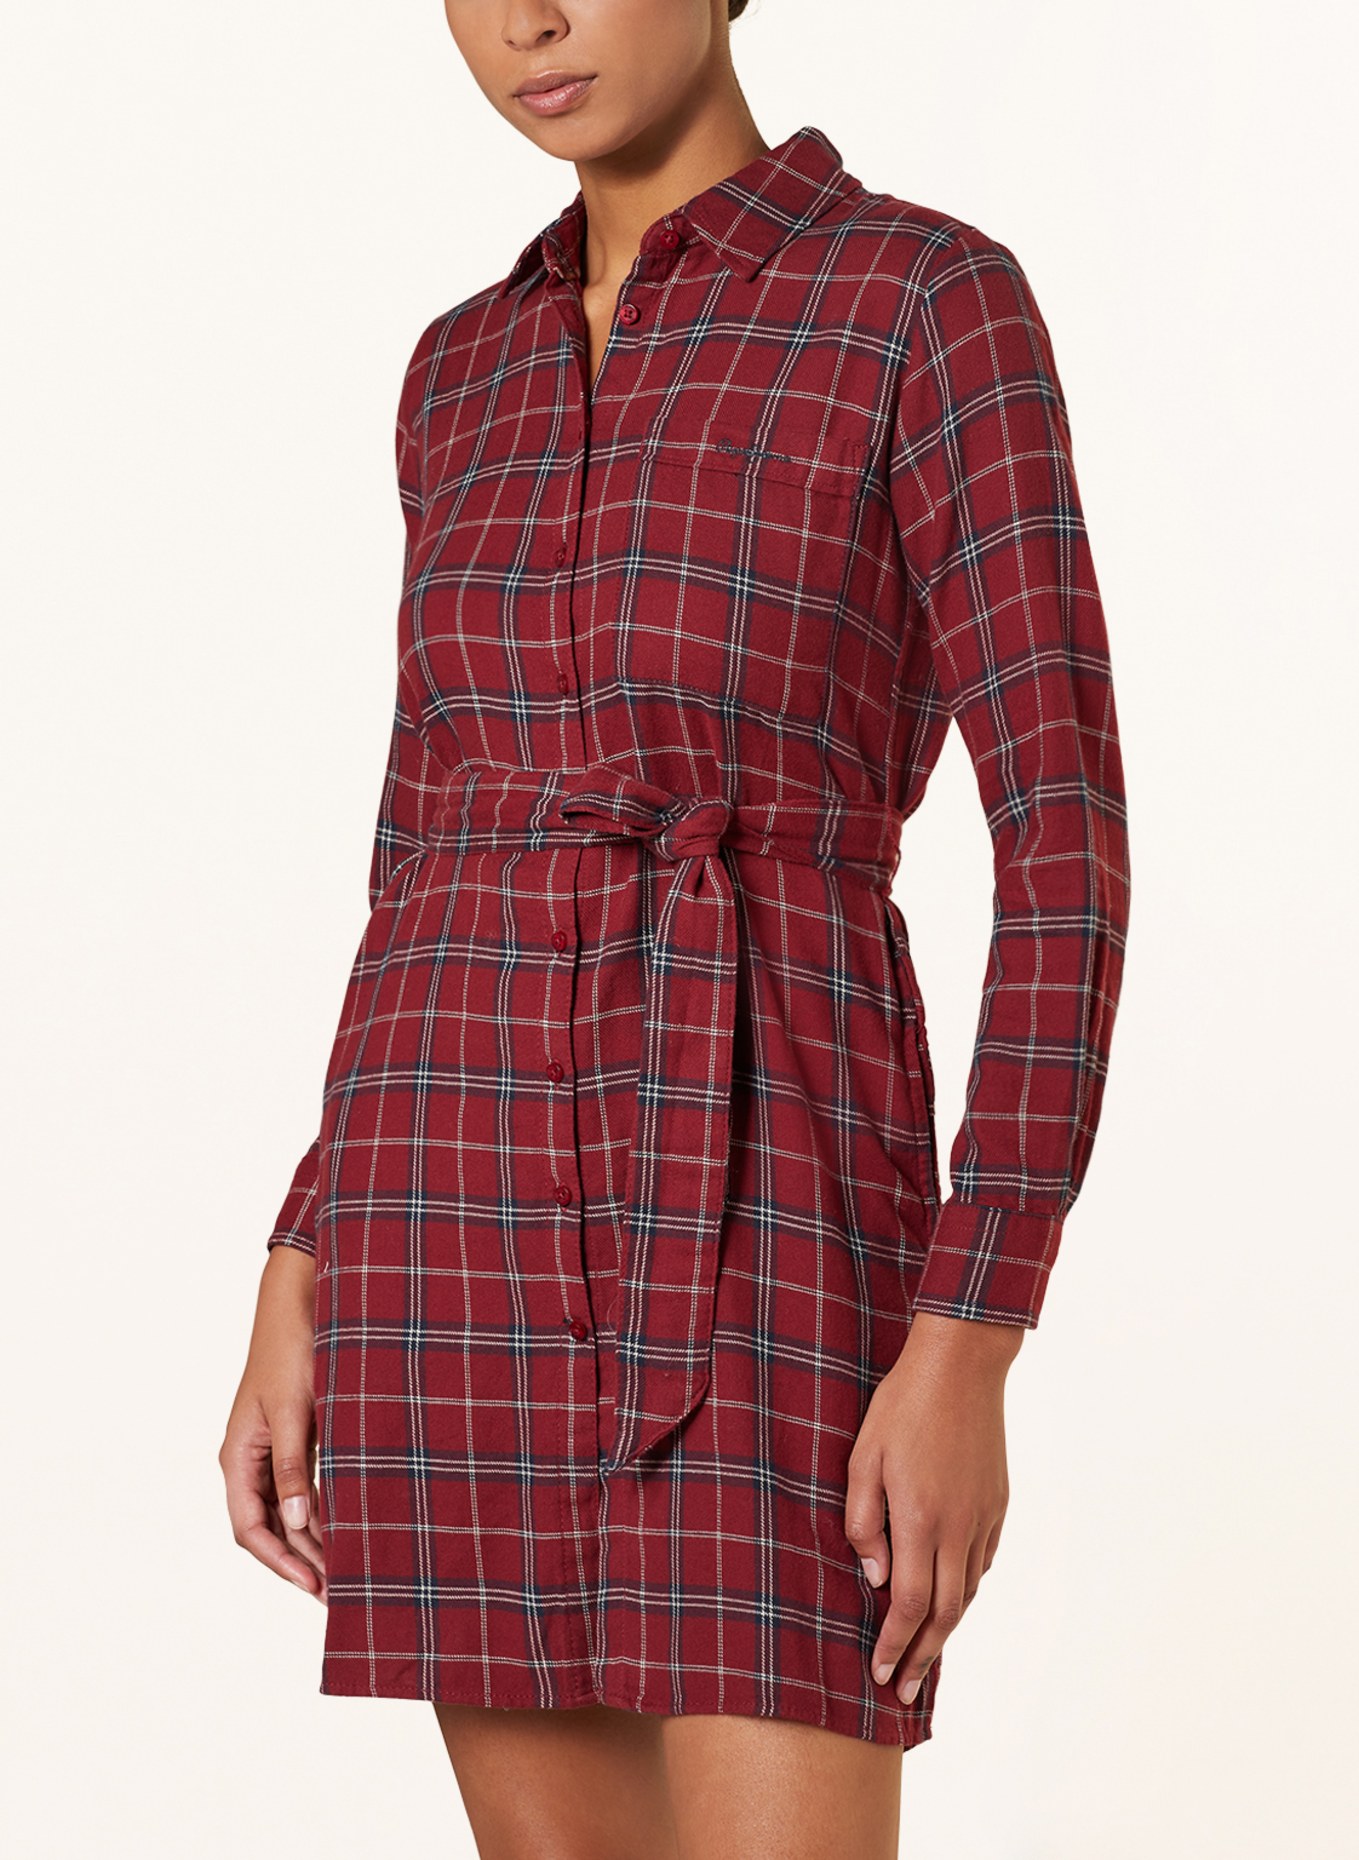 Pepe Jeans Dress Red on SALE | Fashionesta